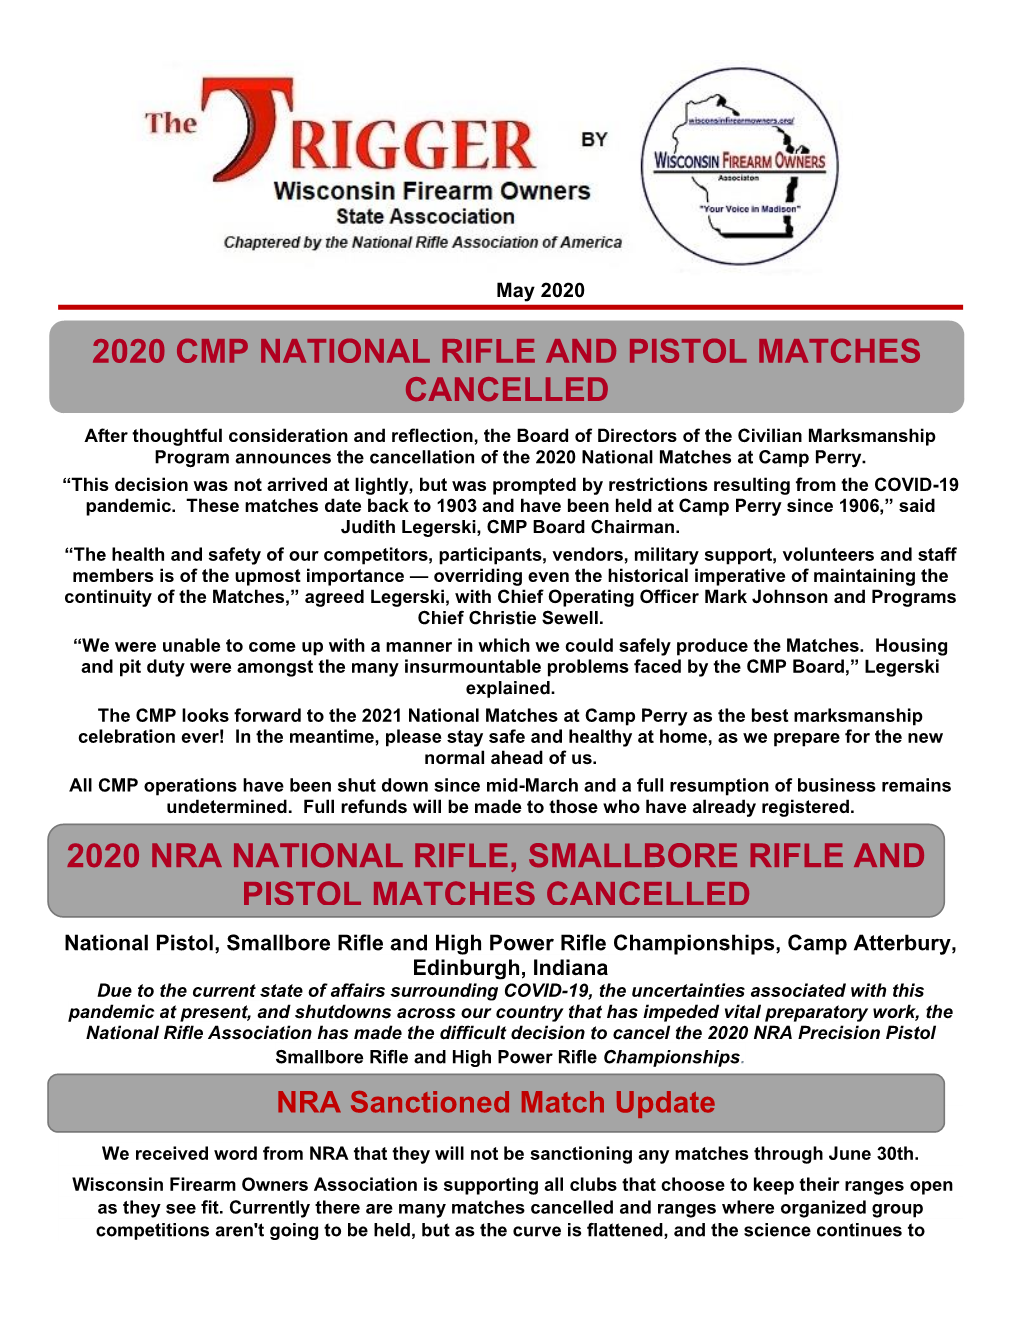 2020 Cmp National Rifle and Pistol Matches Cancelled